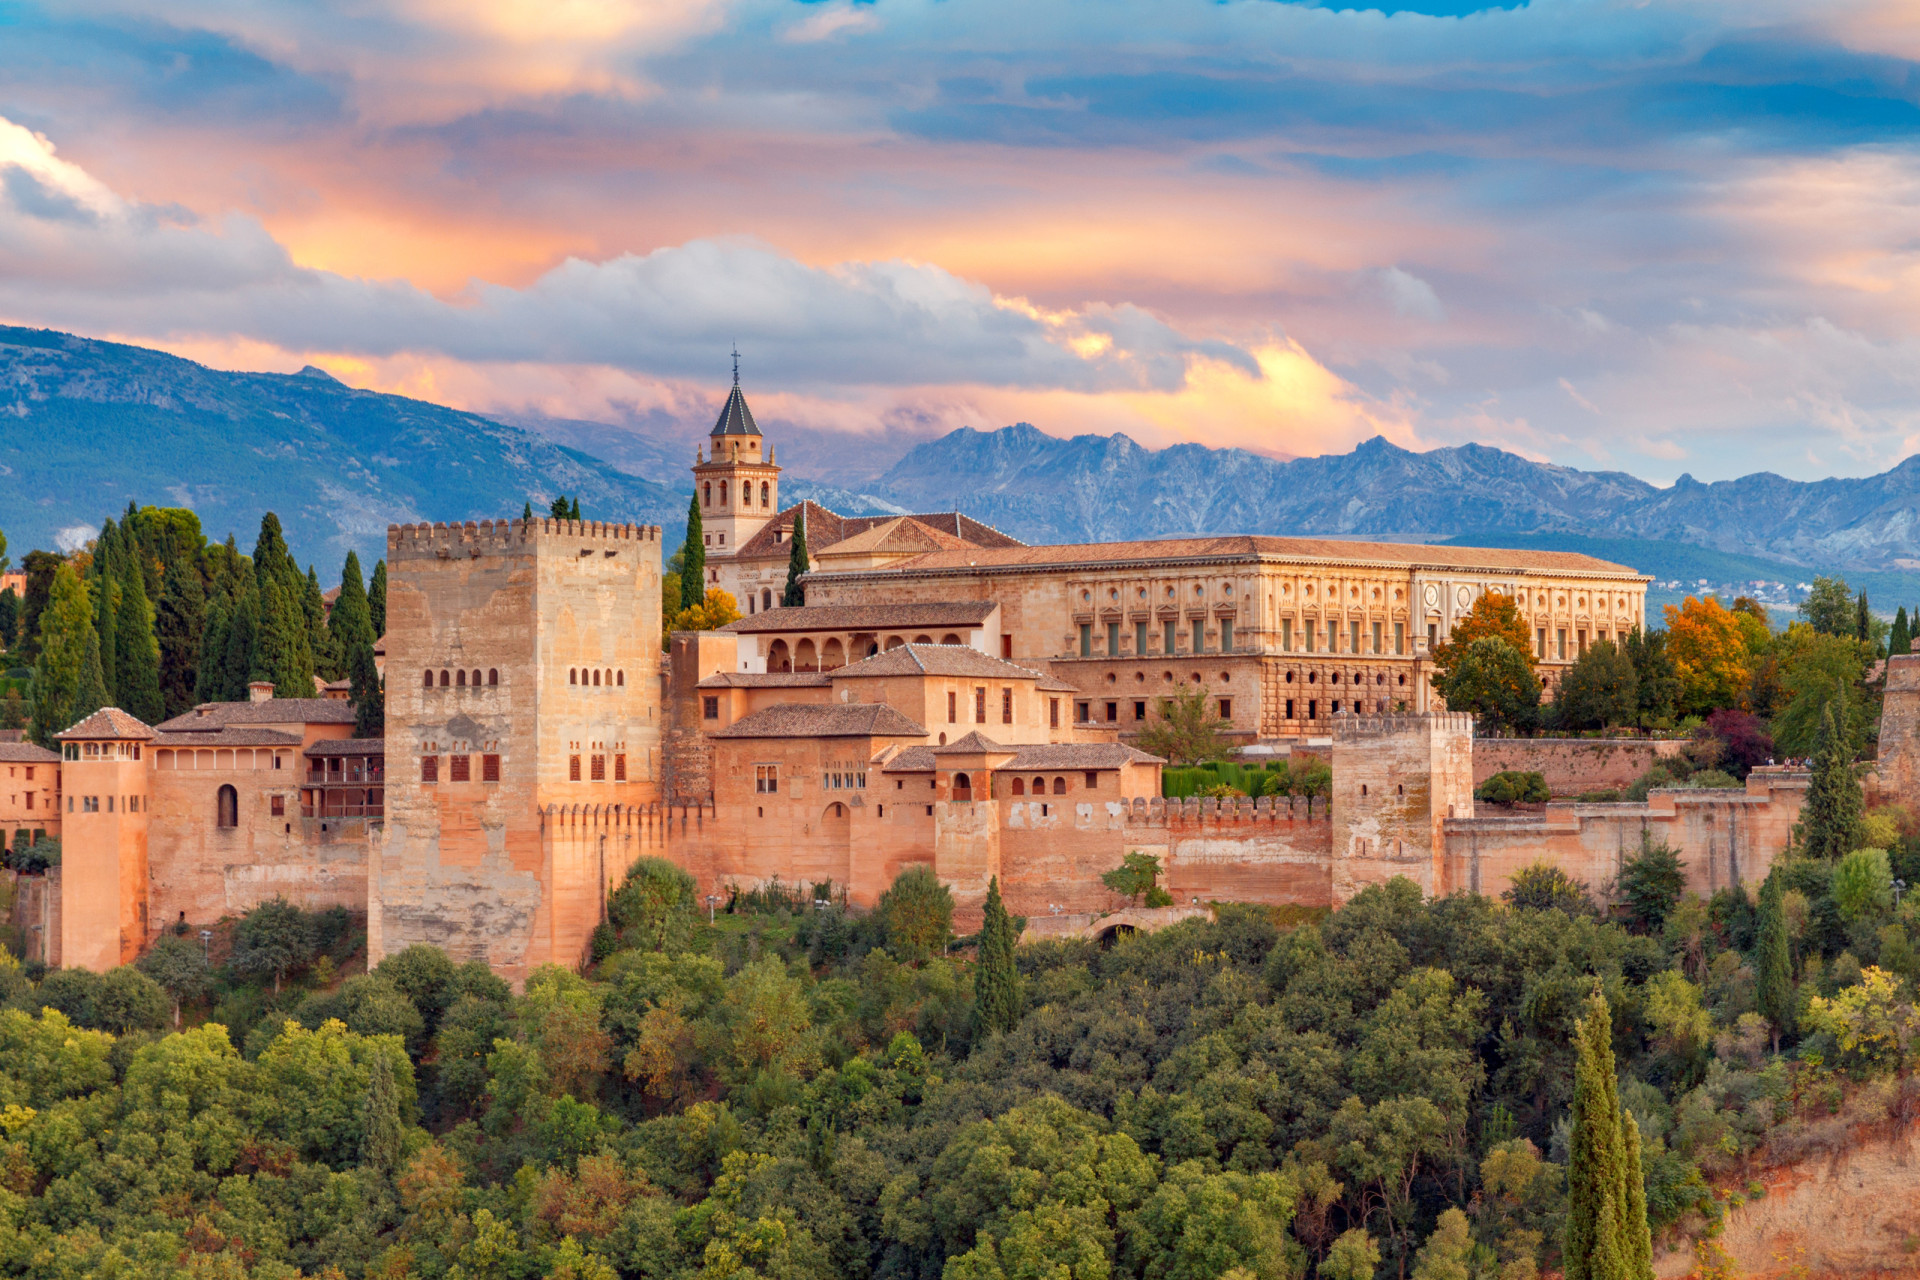 <p>Grenada's Alhambra is a must-visit. However, pickpocketing is common, so keep your personal belongings safe.</p><p>You may also like:<a href="https://www.starsinsider.com/n/345617?utm_source=msn.com&utm_medium=display&utm_campaign=referral_description&utm_content=717448en-us"> Famous men over 40 who refuse to have a dad bod</a></p>